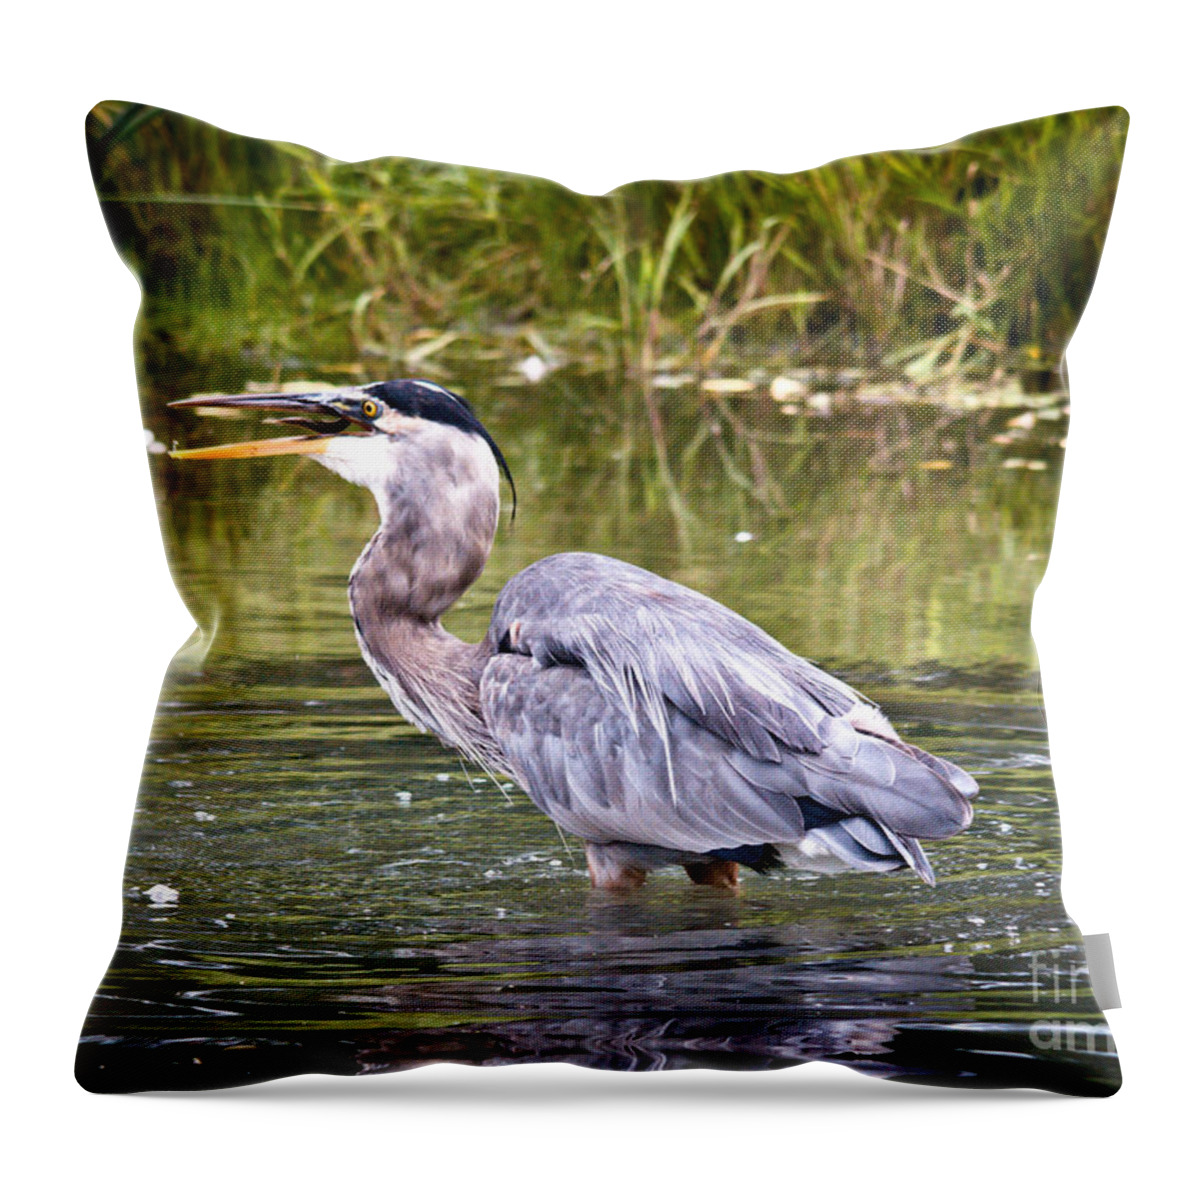  Throw Pillow featuring the photograph Catching Fish by Cheryl Baxter